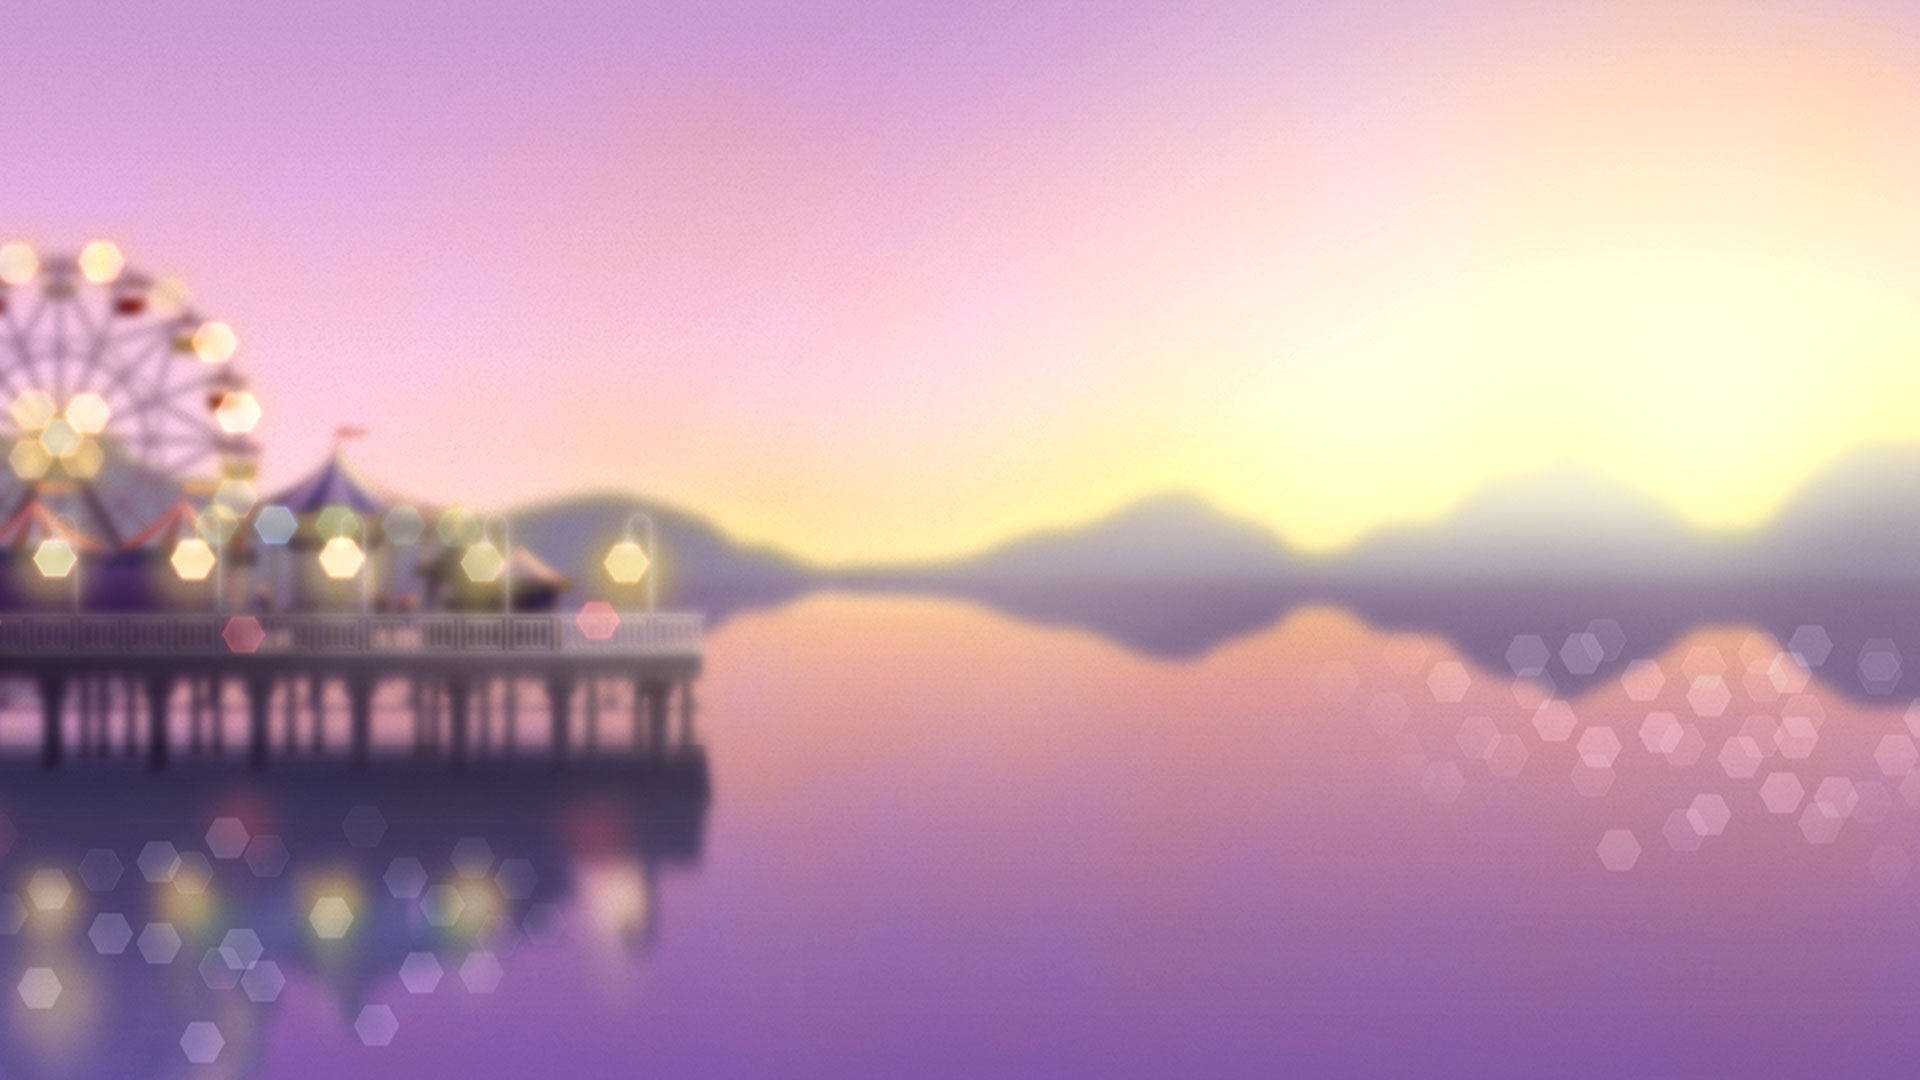 Game hight resolution background Sunset Delight